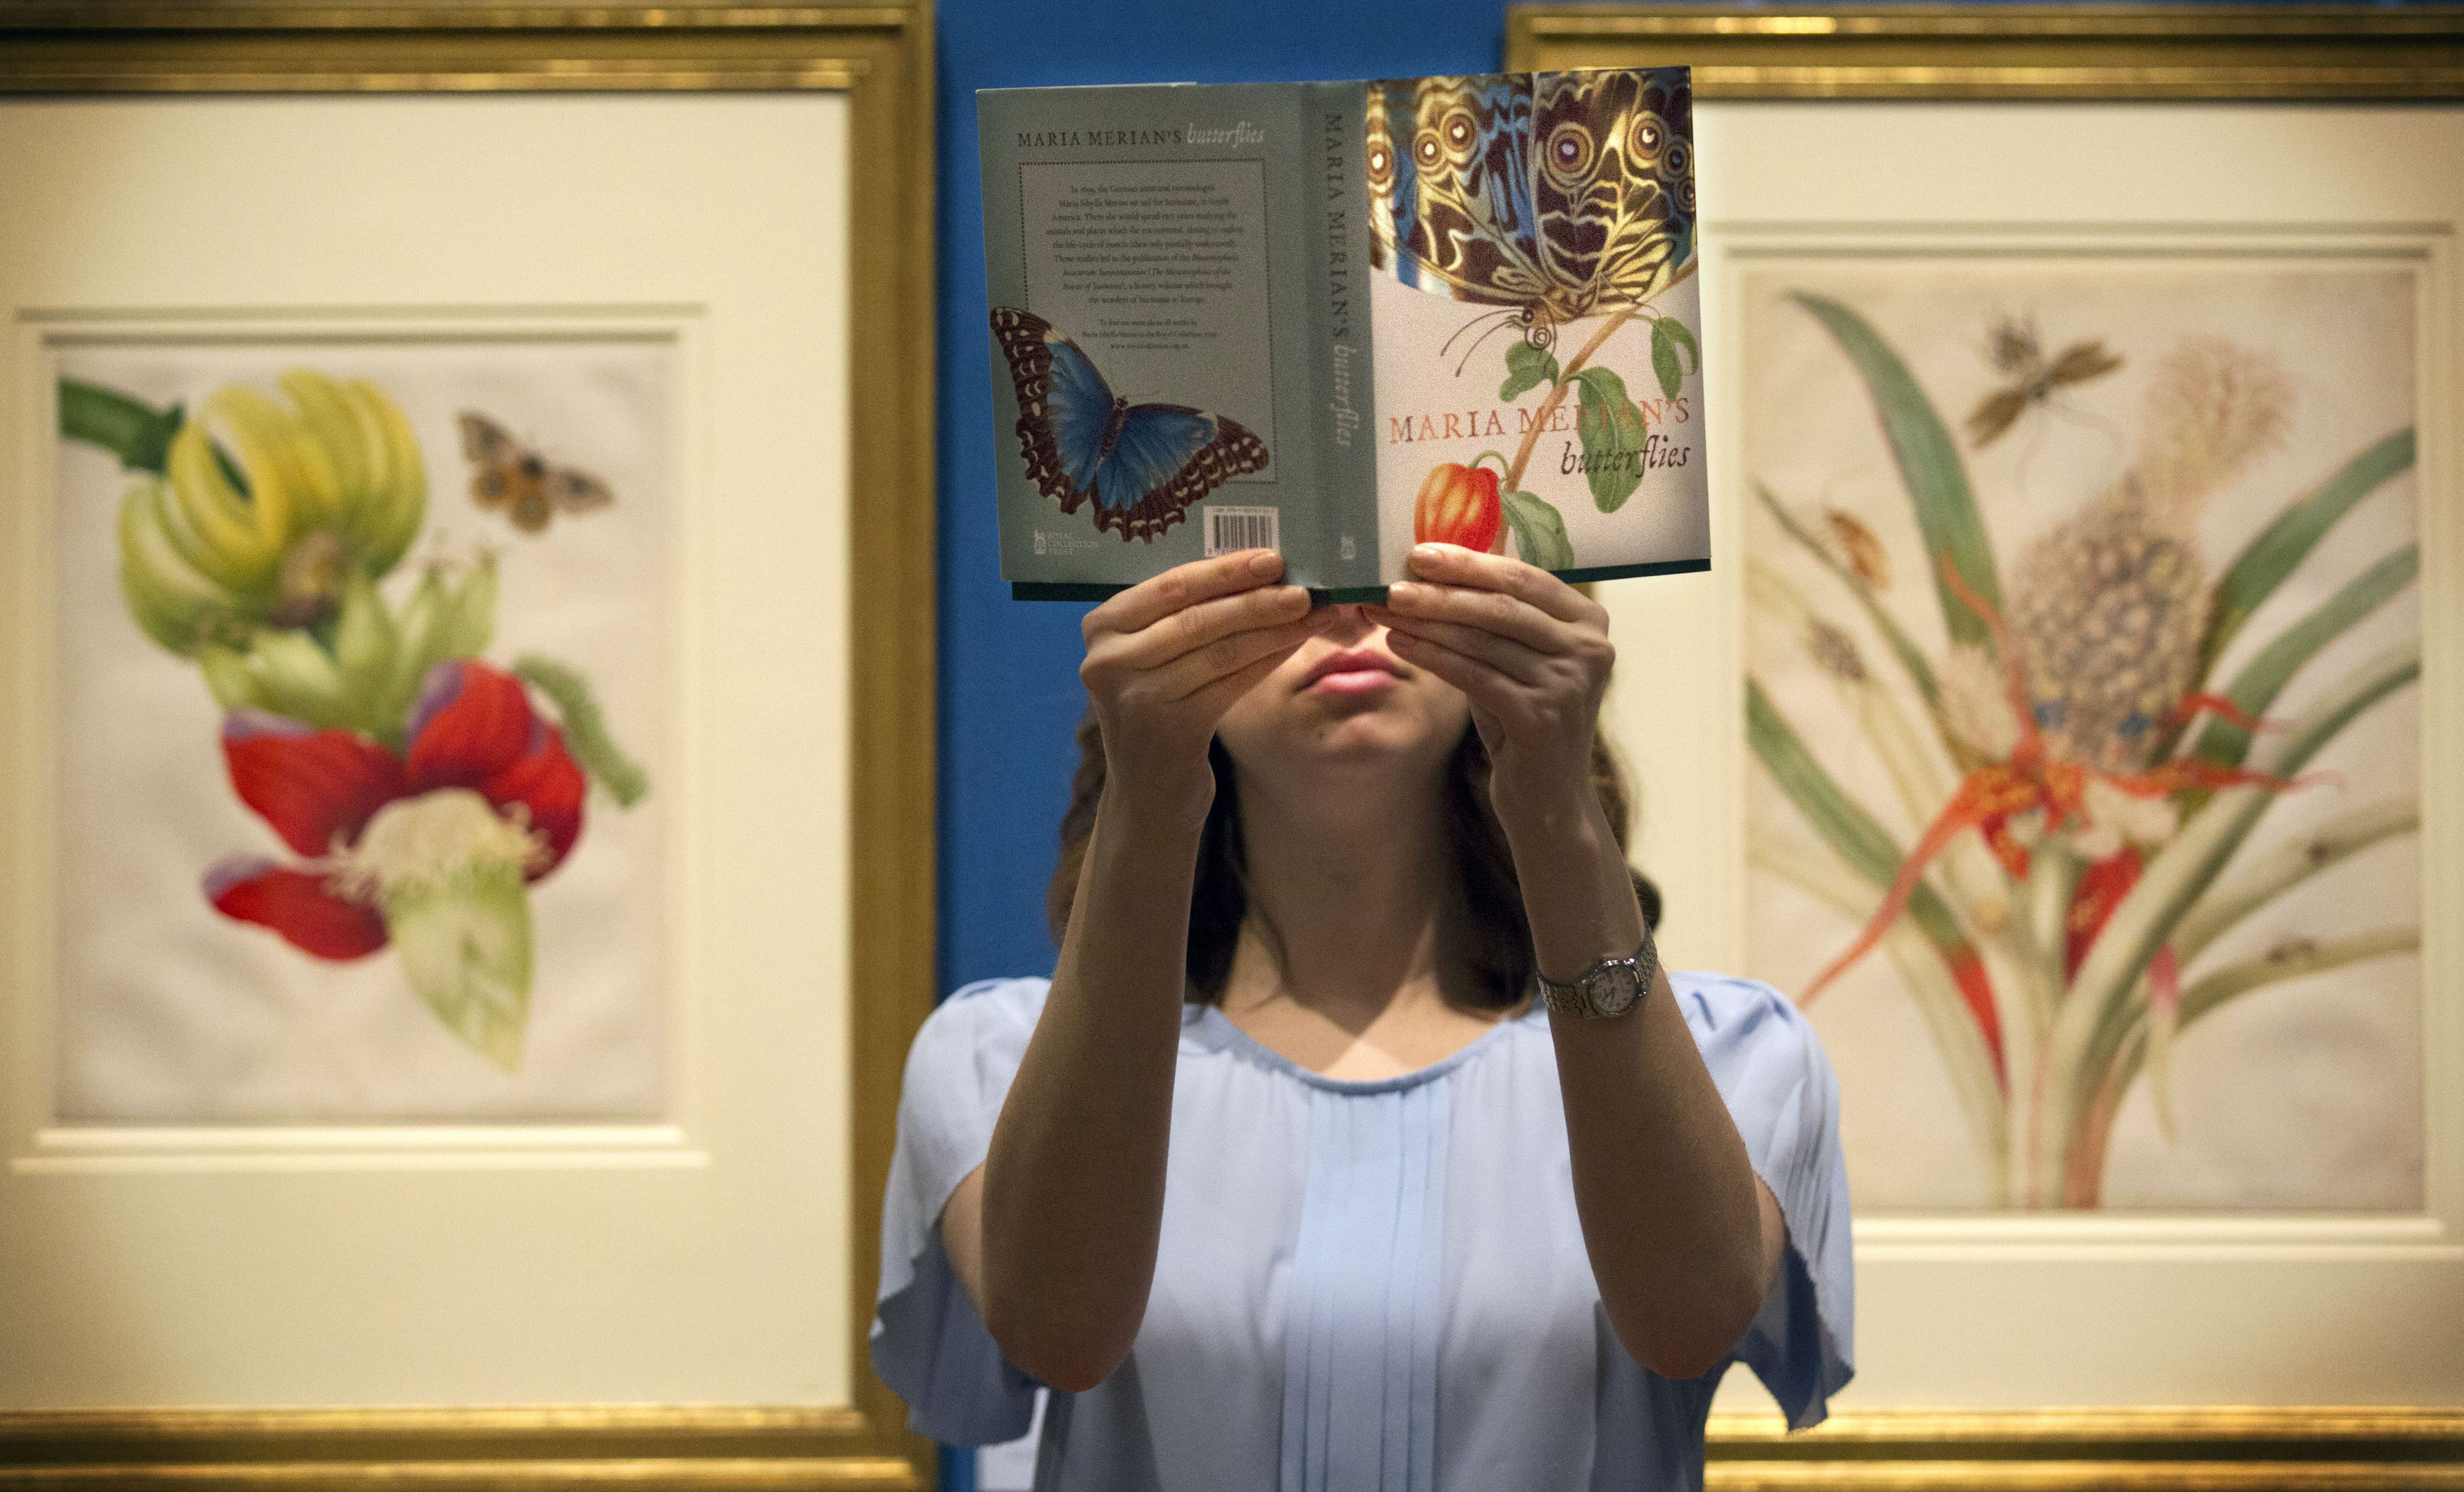 Staff member Katie Buckhalter looking at some of the works displayed at the Queen's Gallery Edinburgh, at the launch of Maria Merian's Butterflies Royal Collection Trust exhibition at the Palace of Holyroodhouse (David Cheskin/Royal Collection/PA Wire)